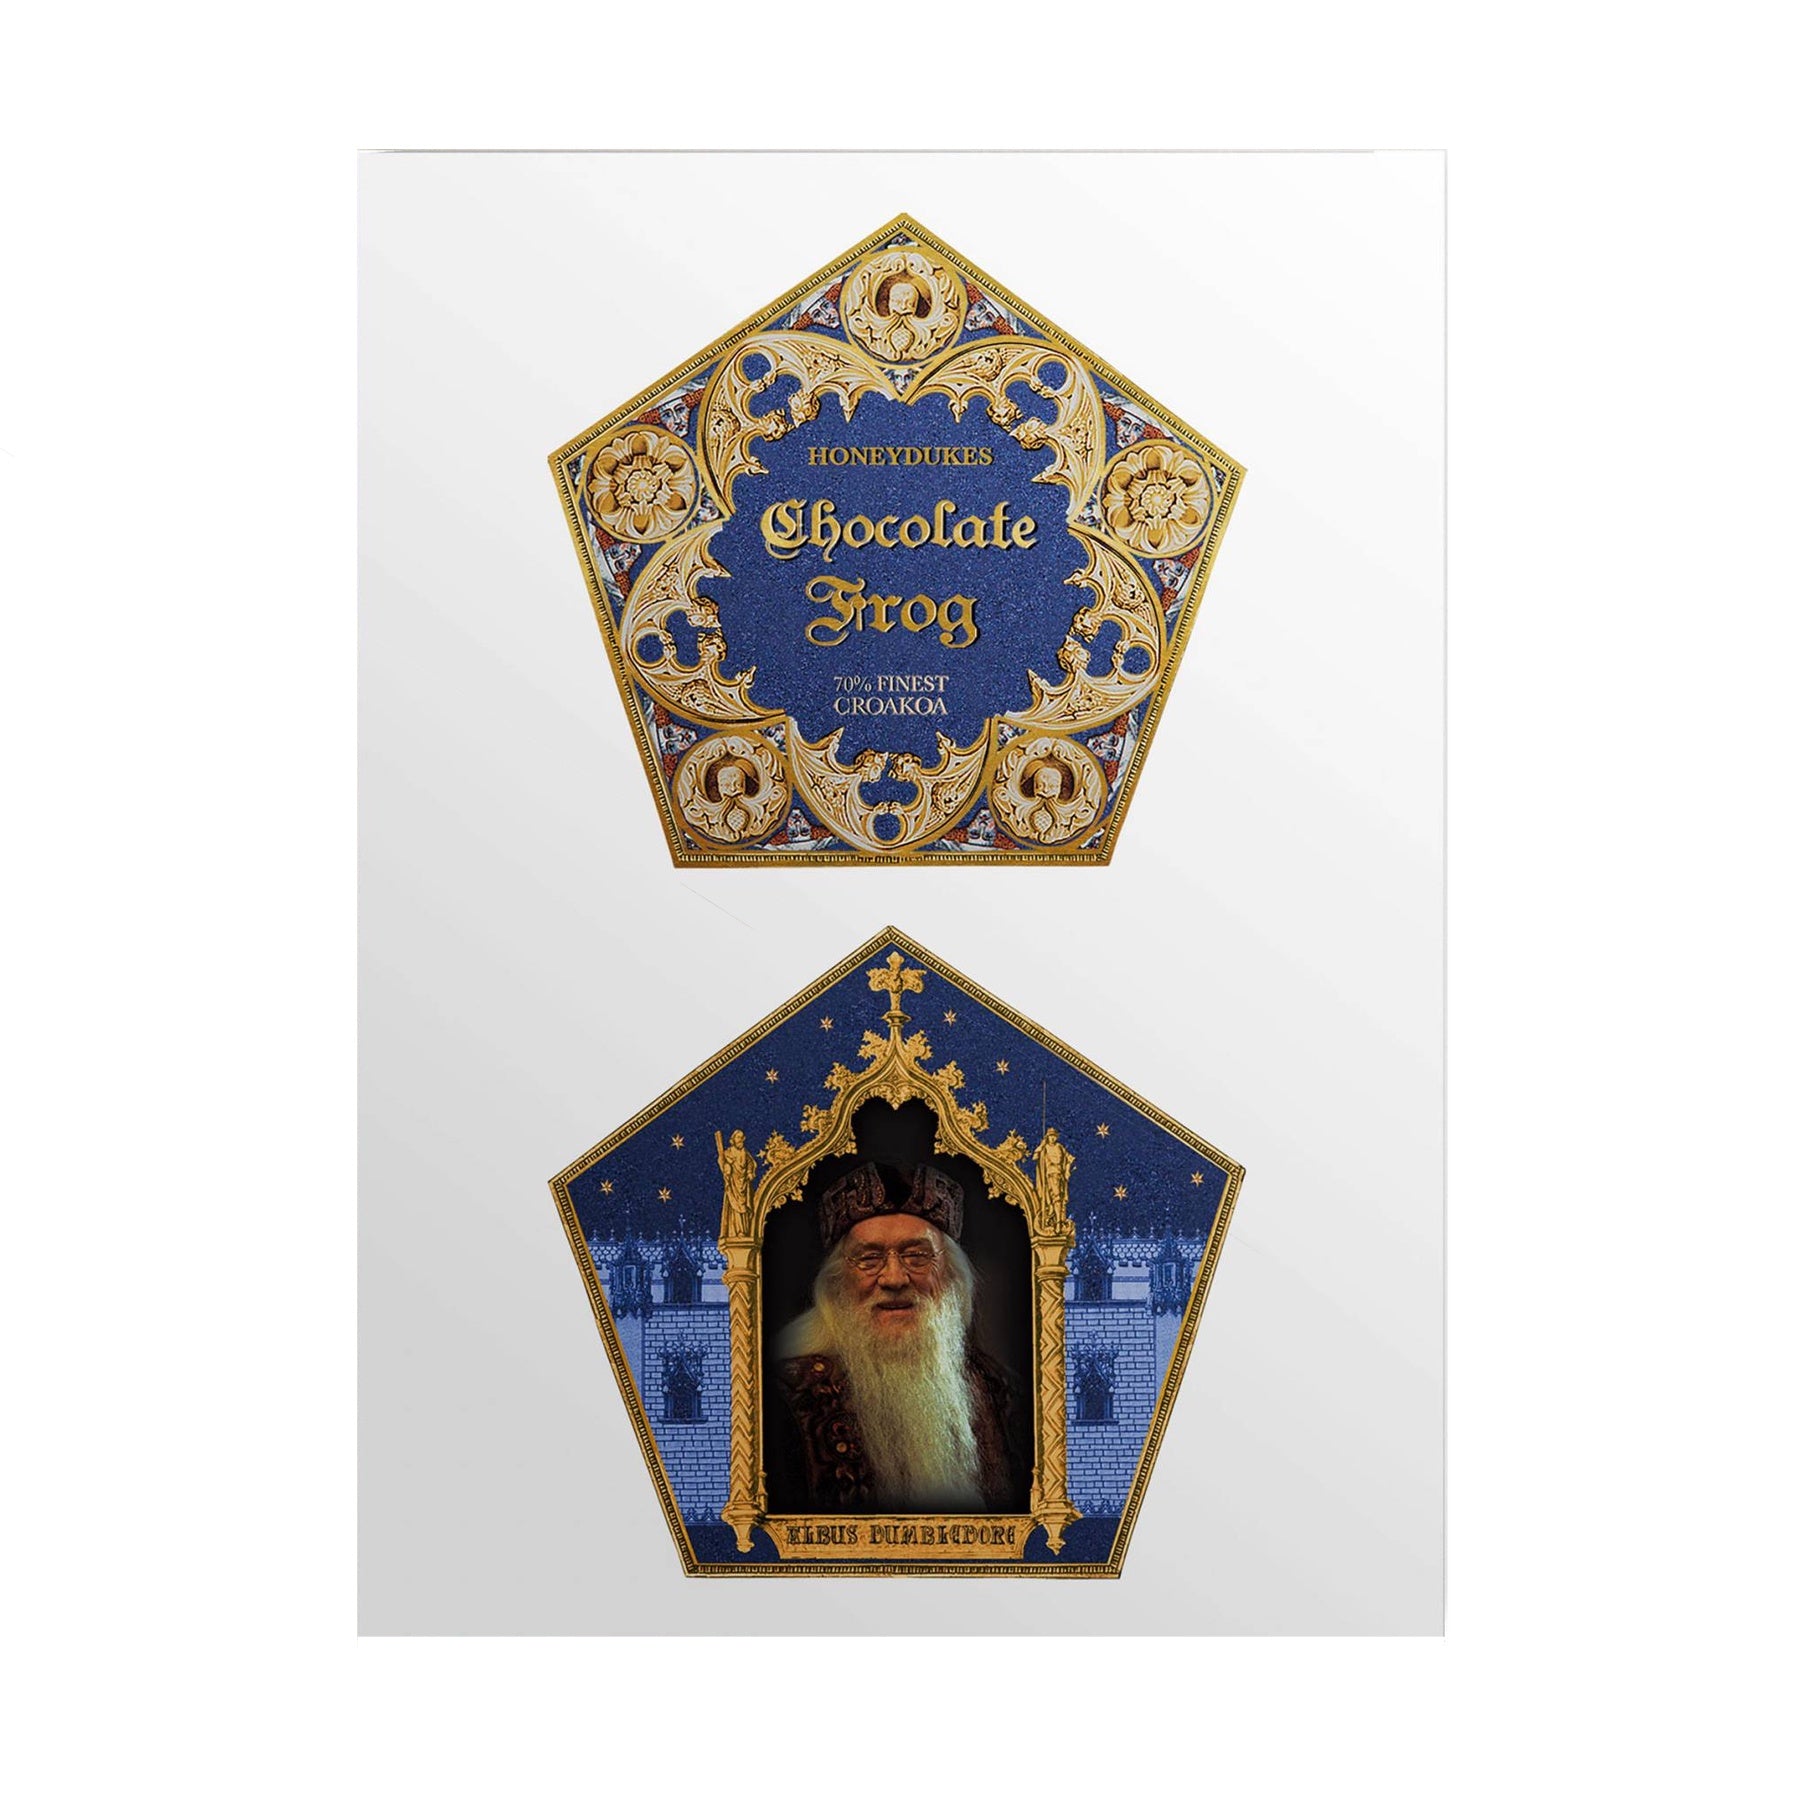 Harry Potter Chocolate Frog in Box New Sealed